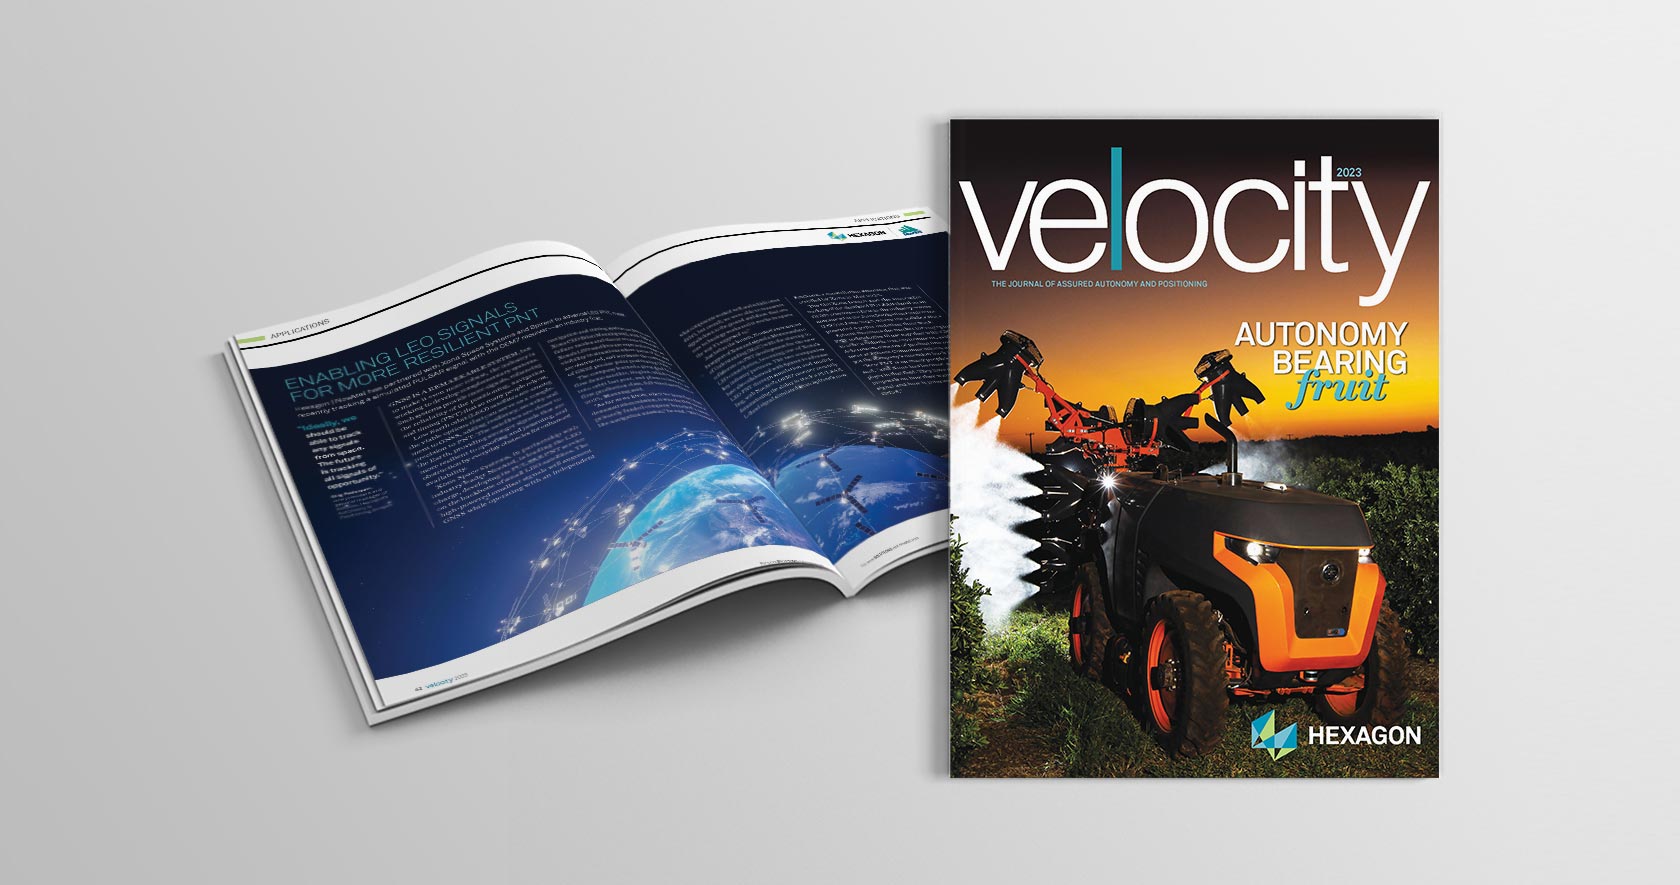 Image of Velocity magazine cover with open magazine behind it